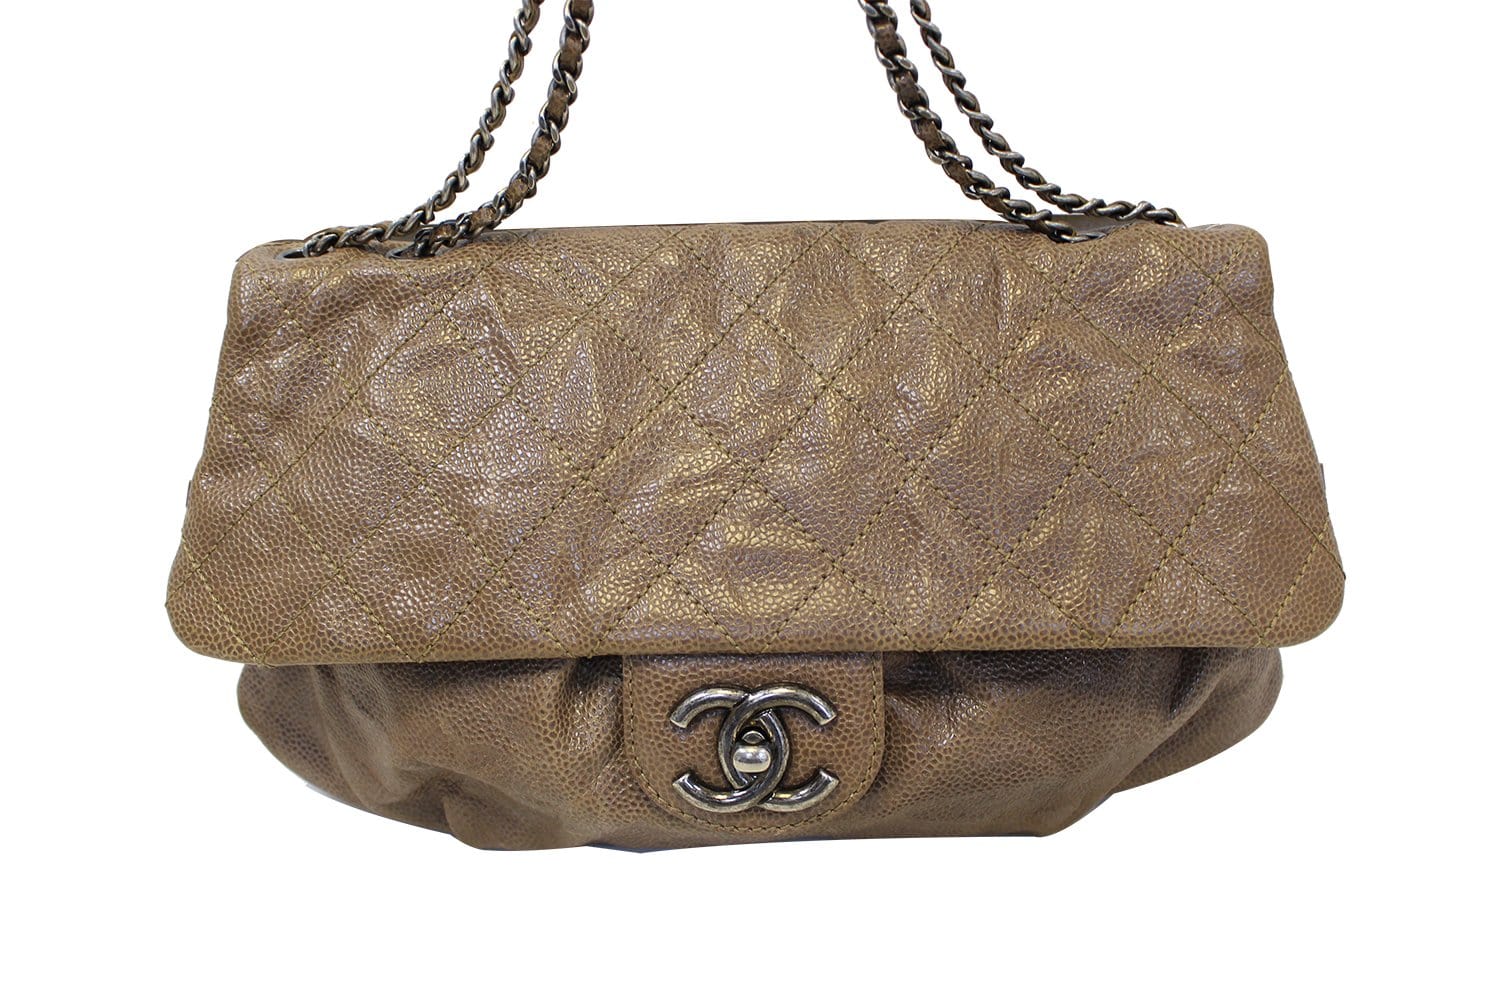 Chanel With Card Caviar Flap Crossbody Bag in Brown Leather ref